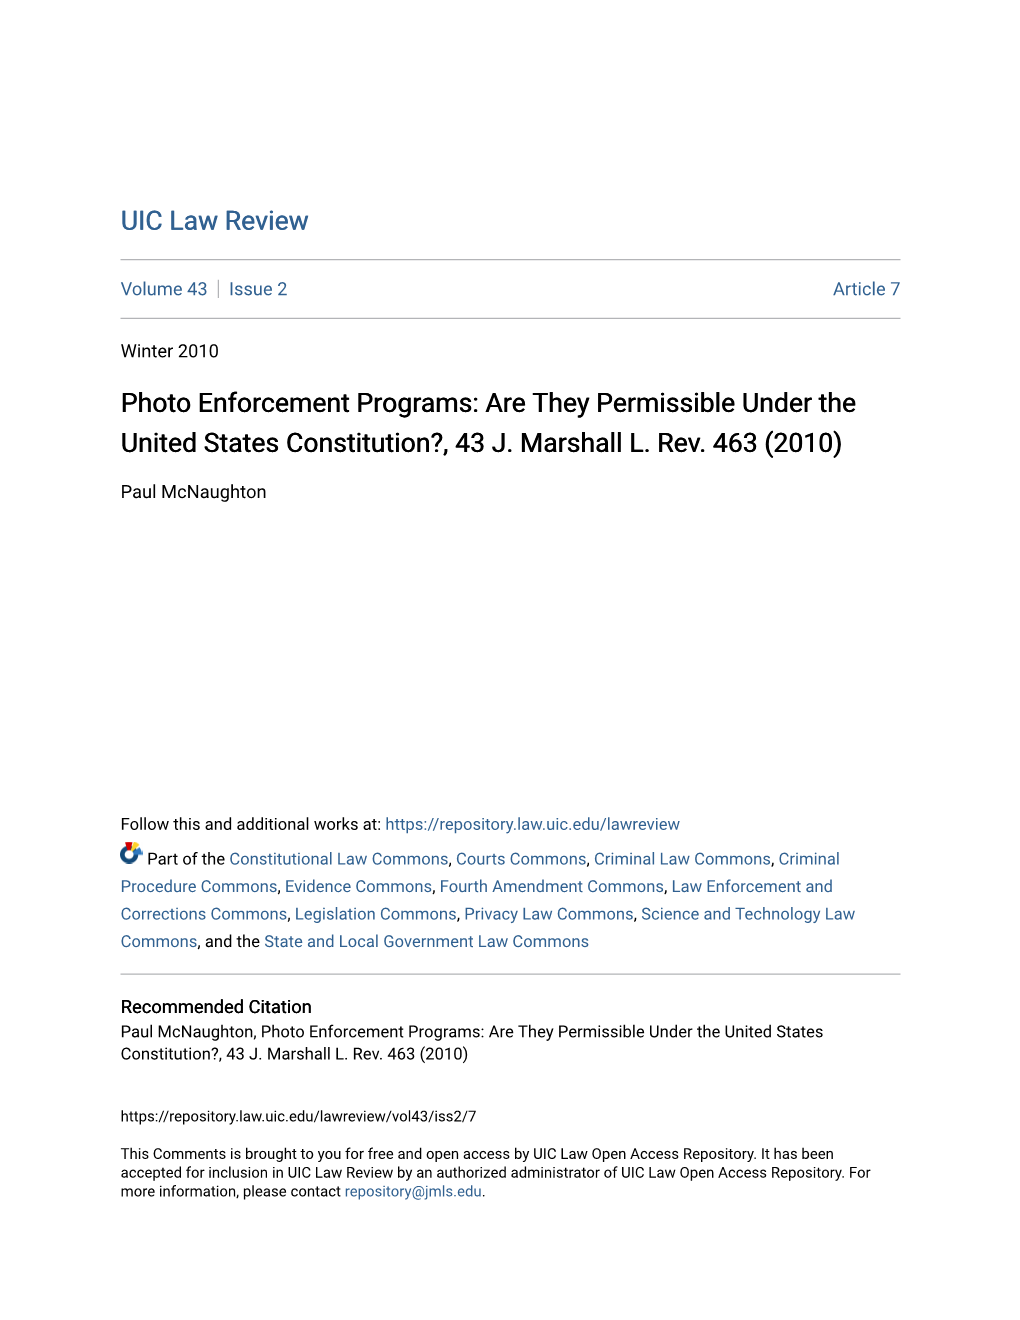 Photo Enforcement Programs: Are They Permissible Under the United States Constitution?, 43 J